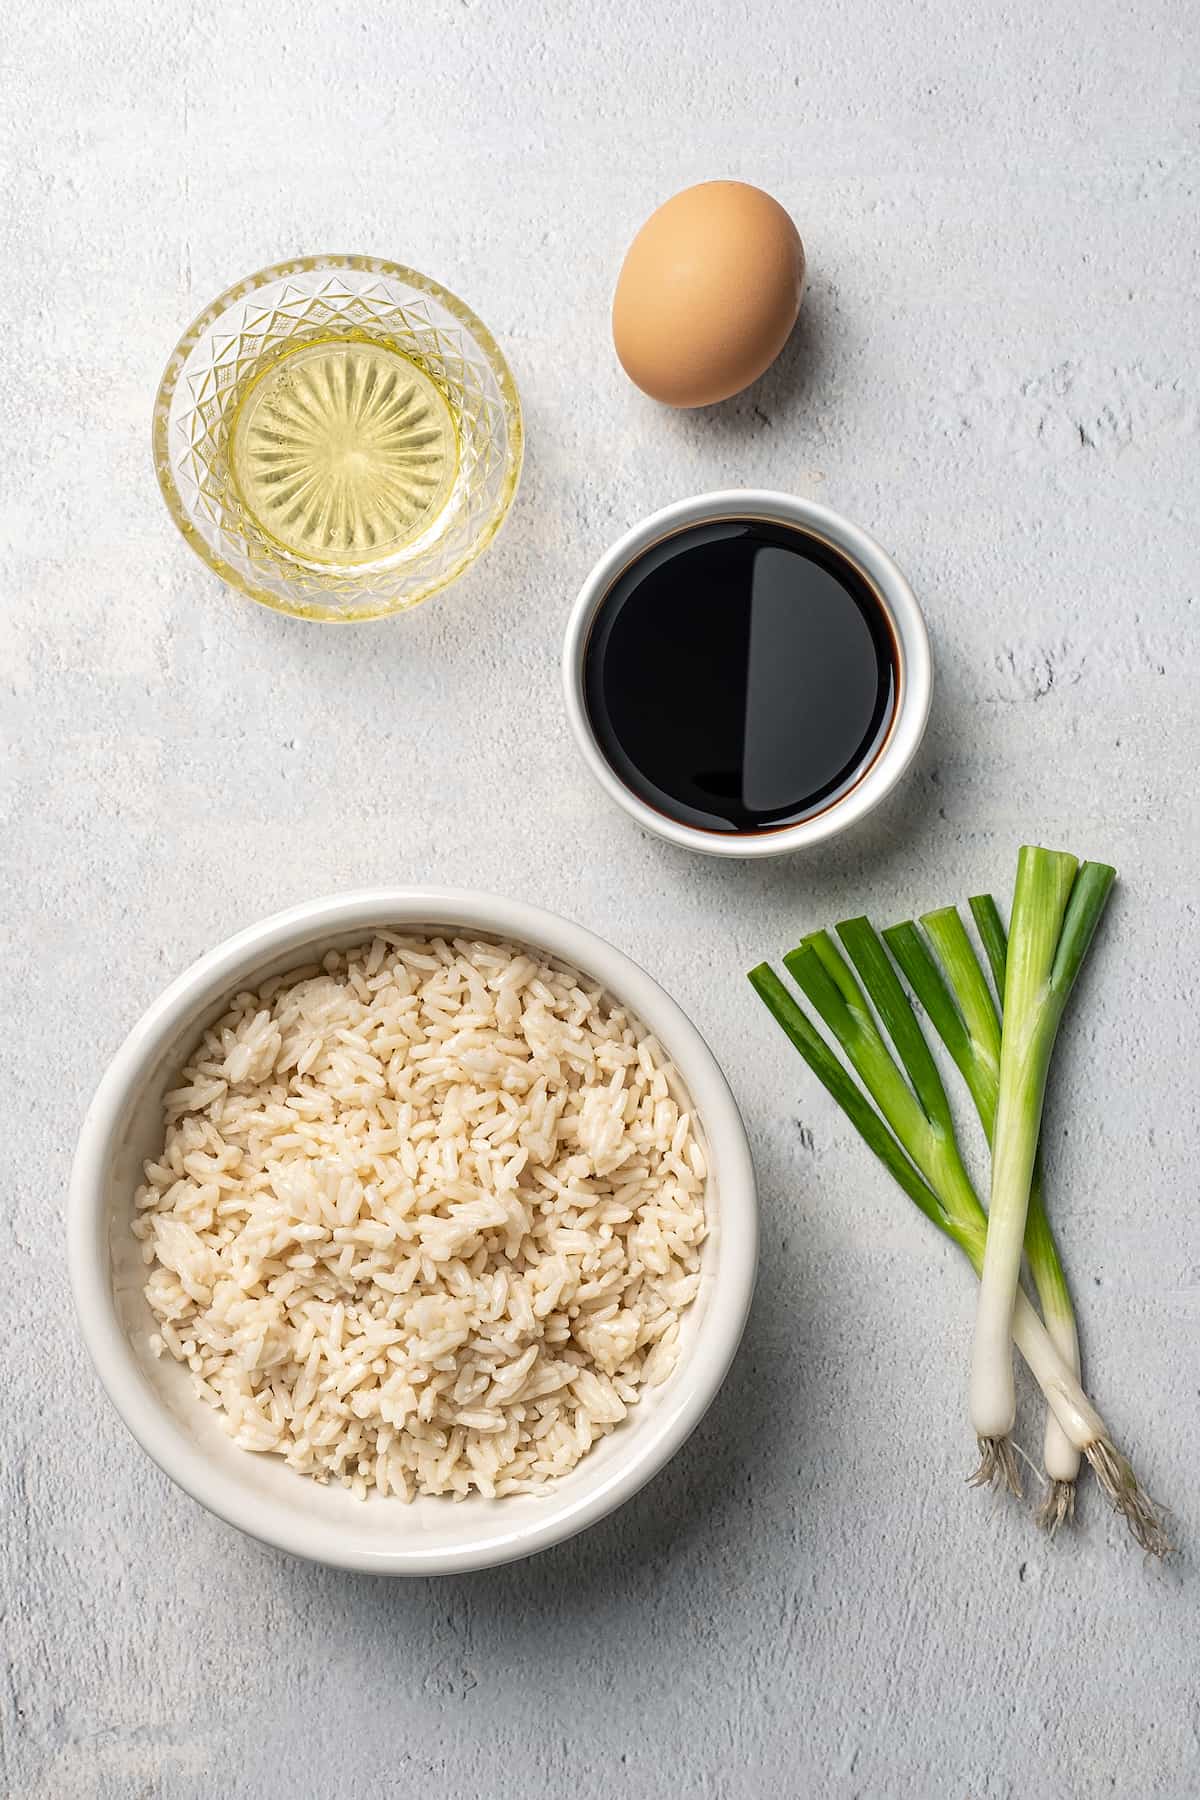 Bowls with rice, vinegar and soy sauce next to scallions and an egg